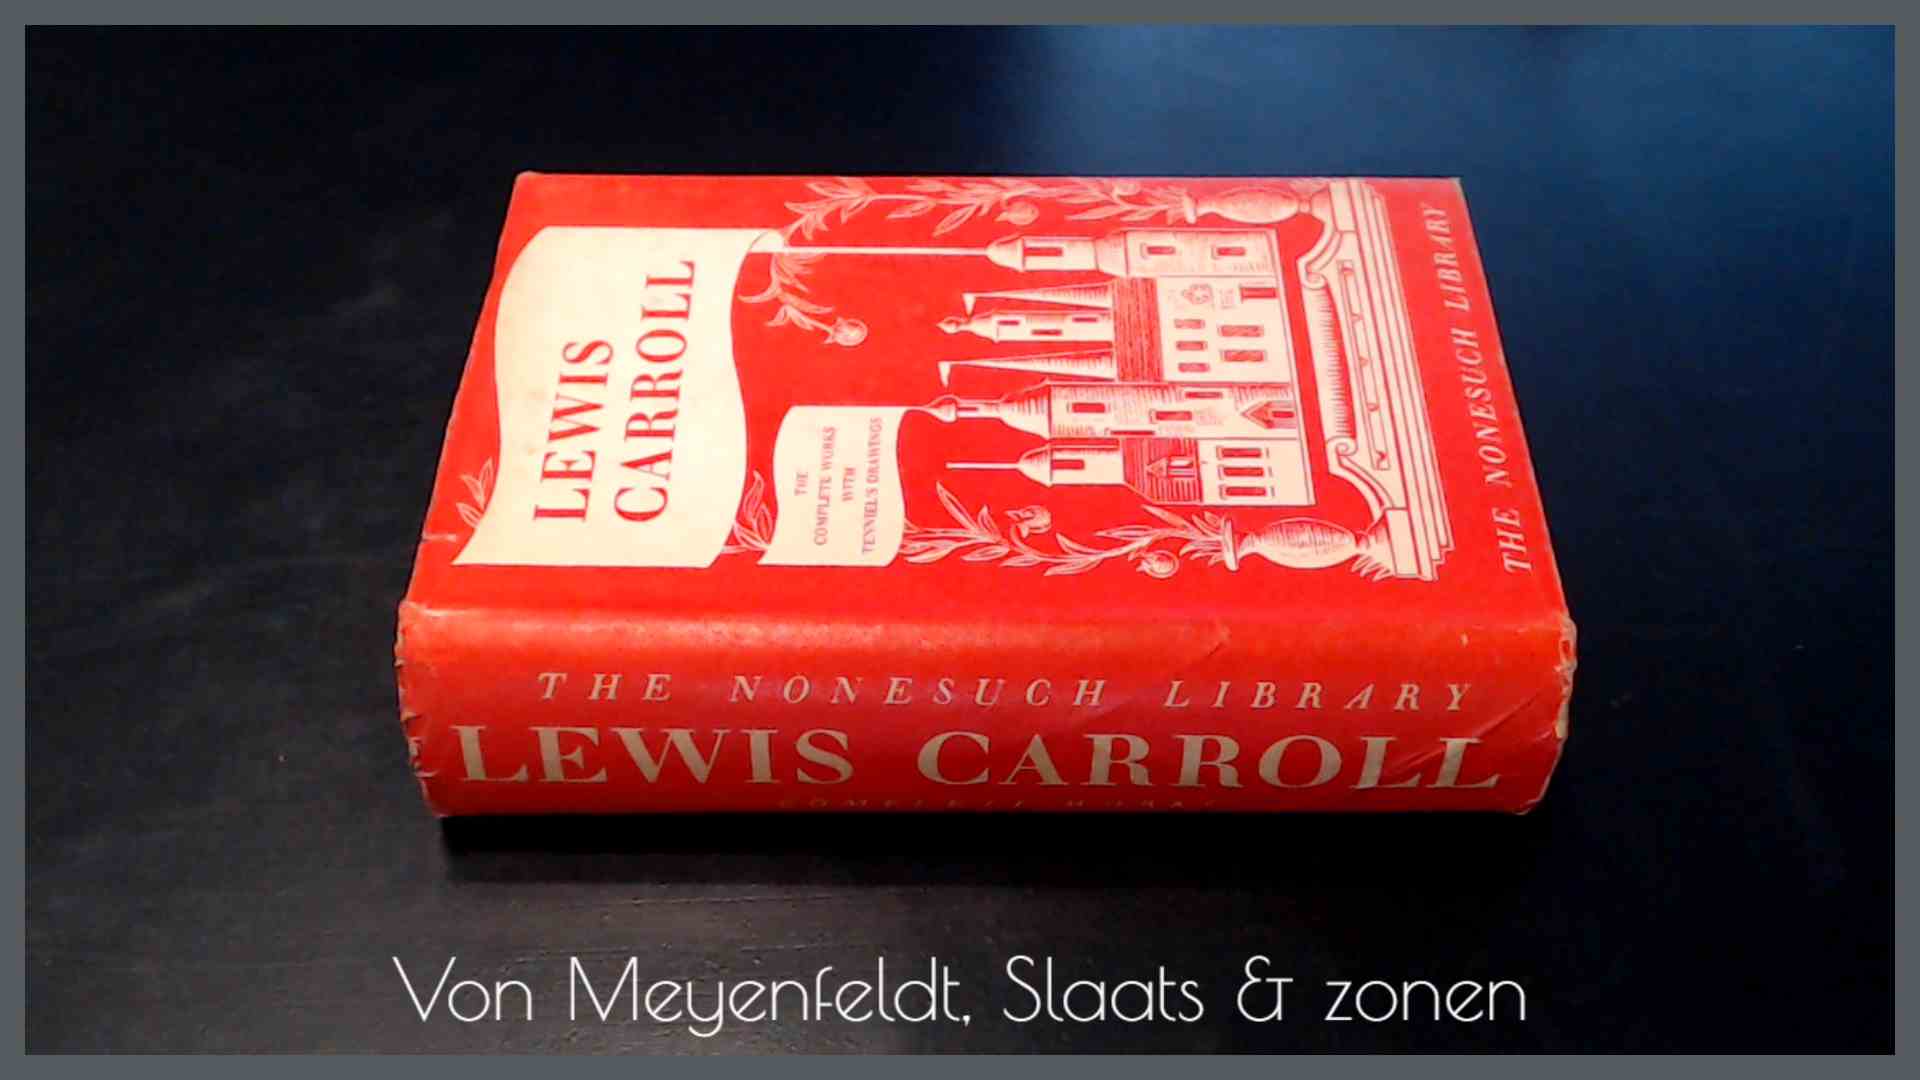 CARROLL, LEWIS - The complete works of Lewis Carroll